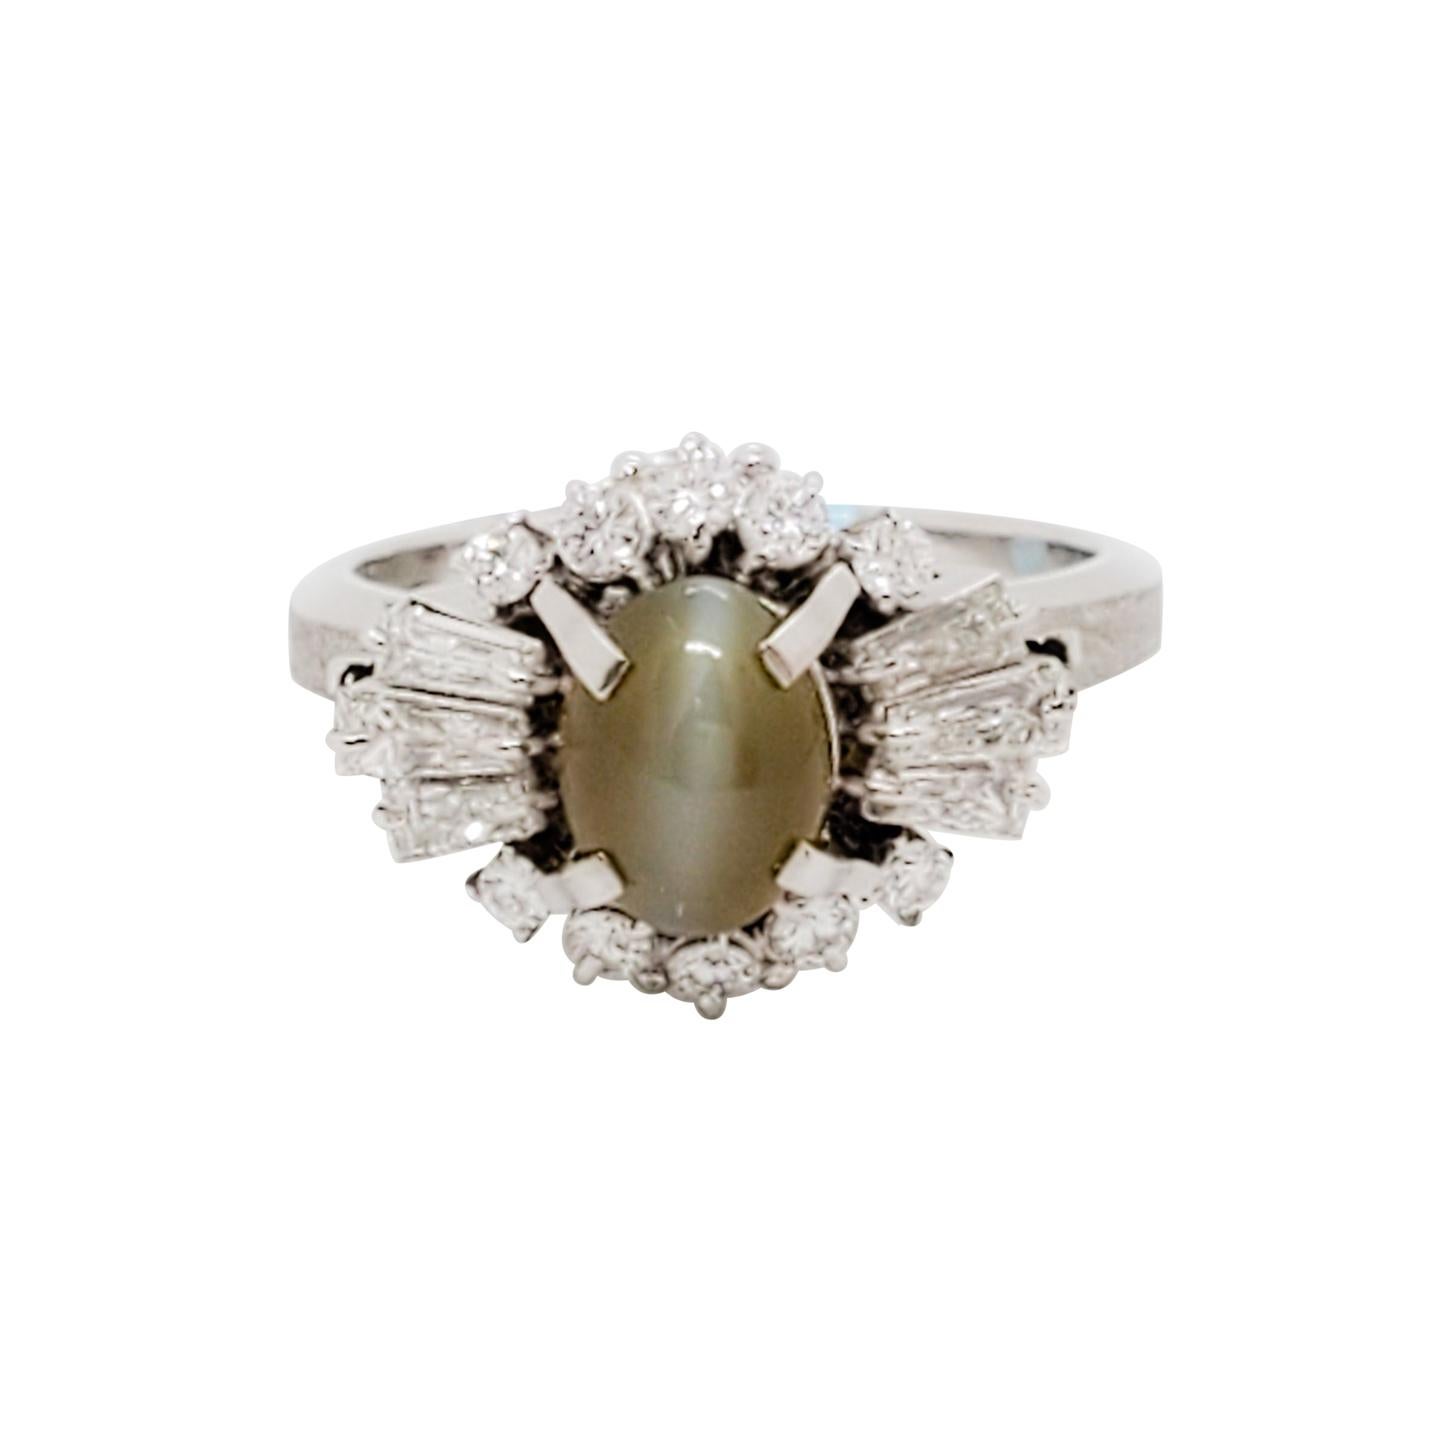 Cat's Eye Chrysoberyl Oval Cabochon and White Diamond Cocktail Ring